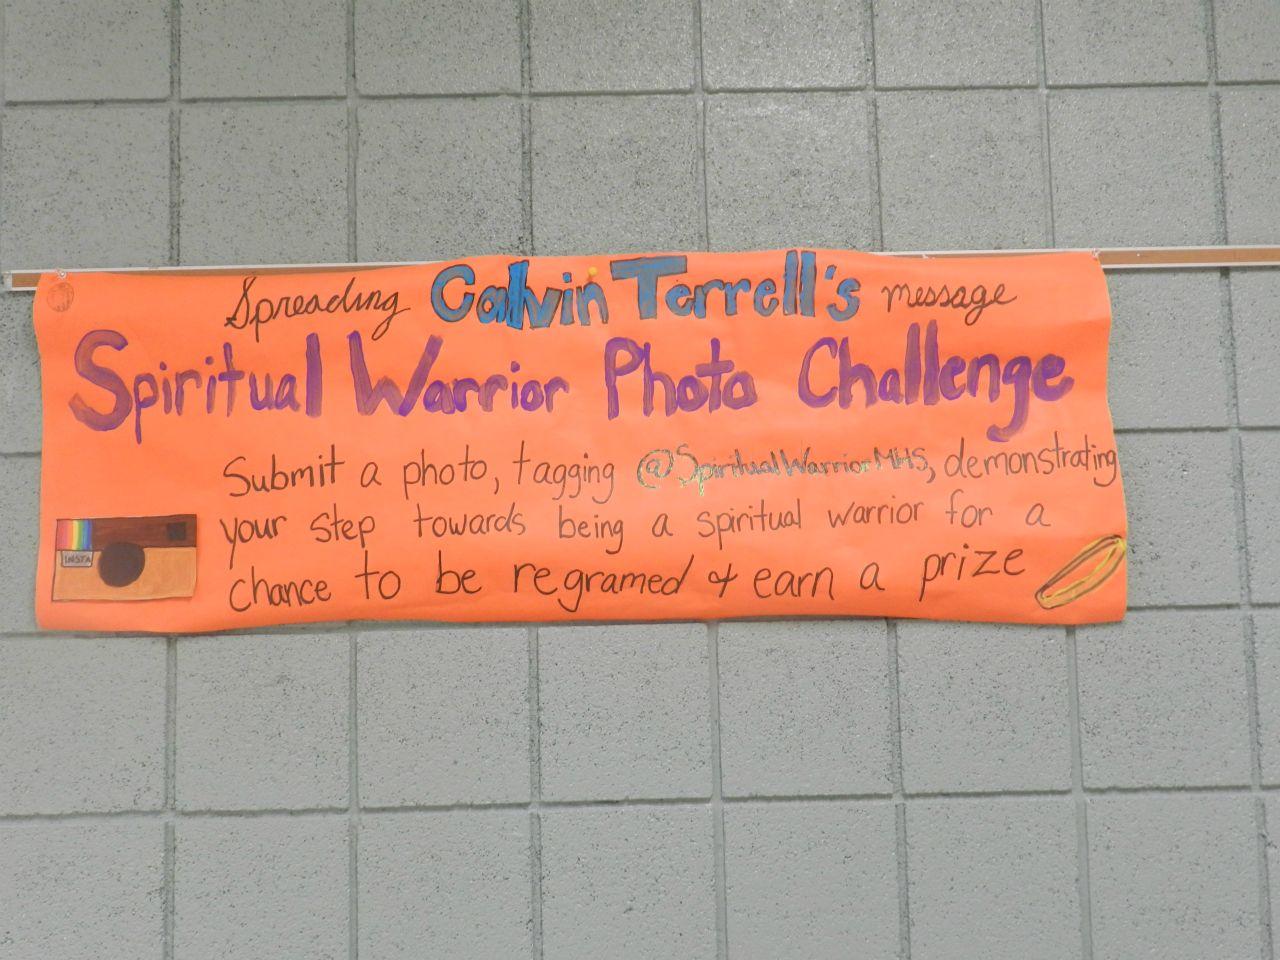 HRC has created and posted banners such as these around the school to advertise the warrior campaign. Photo credit: Adelia Davis